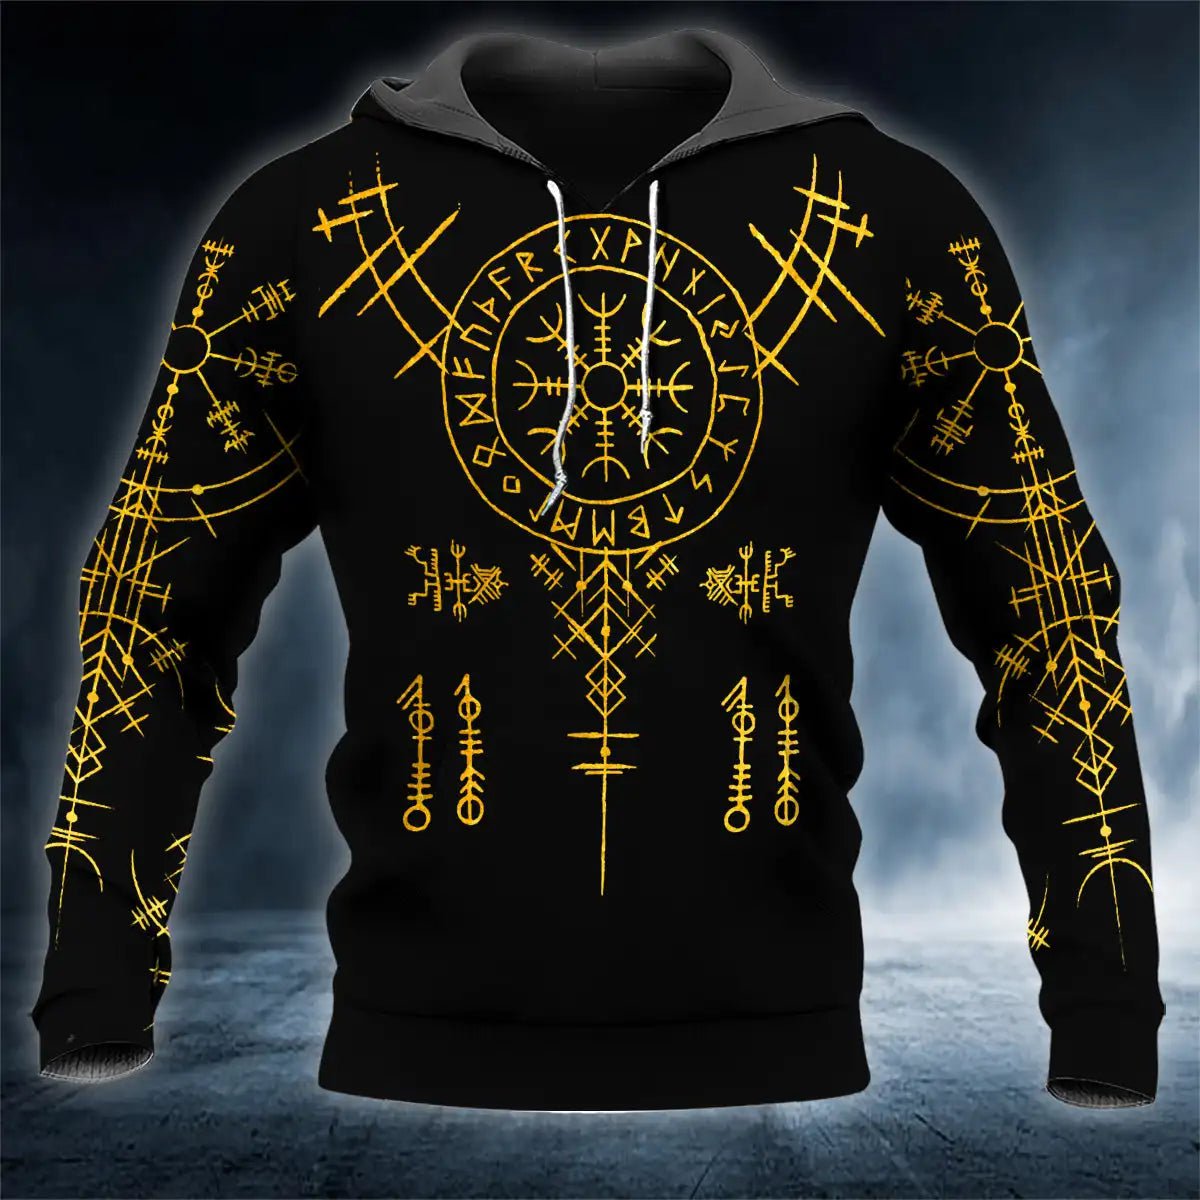 Golden Helm Of Awe Viking Tattoo 3D All Over Printed Hoodies For Men/Women Streetwear Sweatshirts Zip Up Hoodie Sudaderas Hombre Ancient Treasures Ancientreasures Viking Odin Thor Mjolnir Celtic Ancient Egypt Norse Norse Mythology